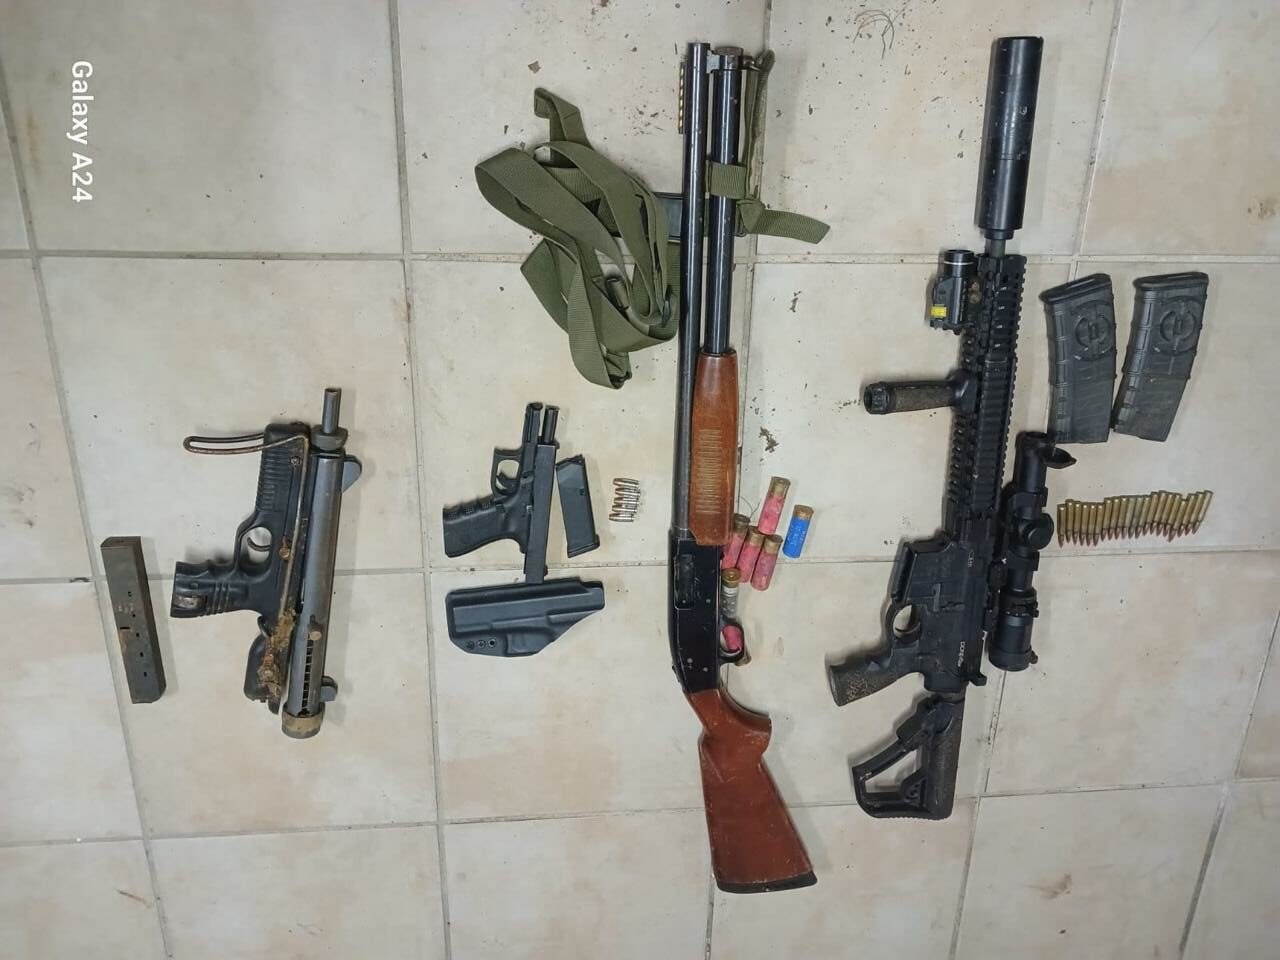 Two suspects arrested in connection with burglary and theft, five firearms including rifles confiscated